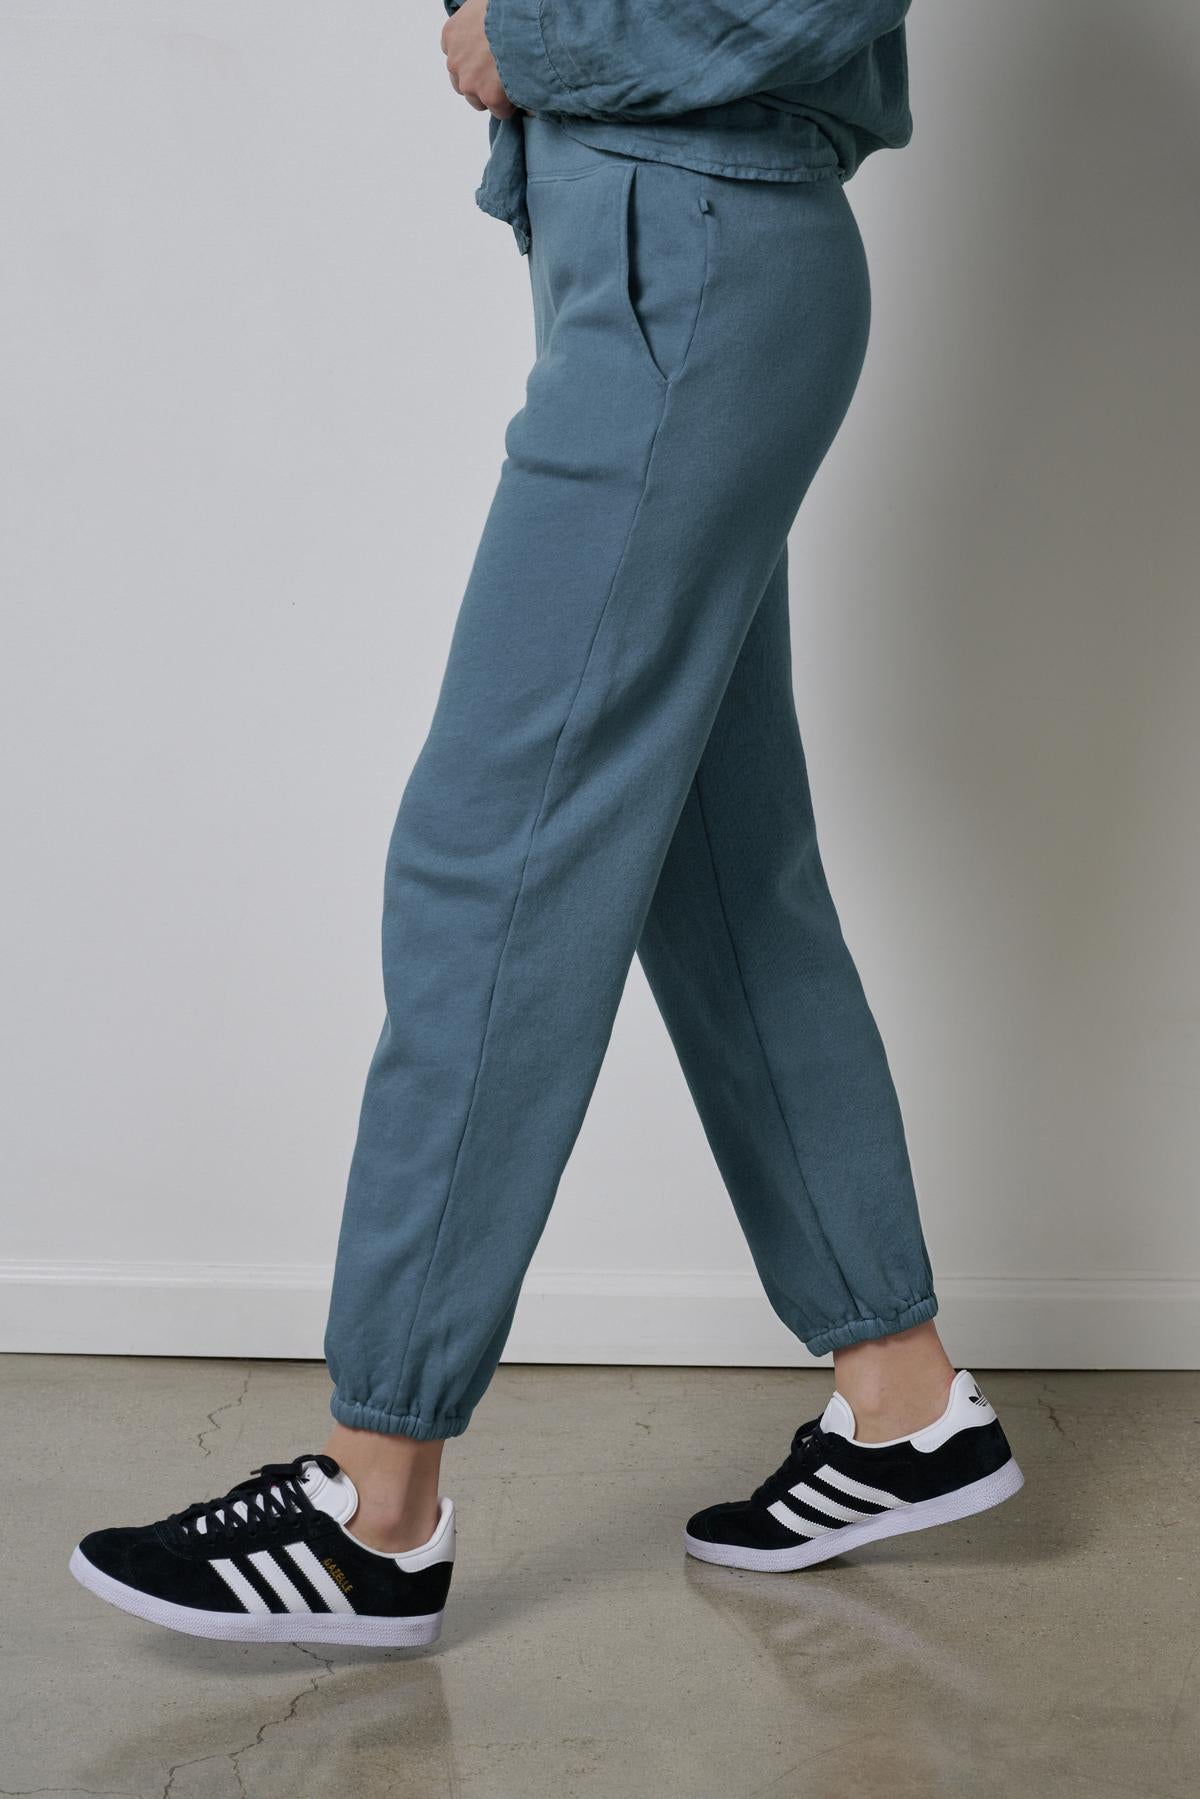 Person standing sideways showcasing sustainable fashion with Velvet by Jenny Graham Zuma Sweatpants and black sneakers.-36594728075457